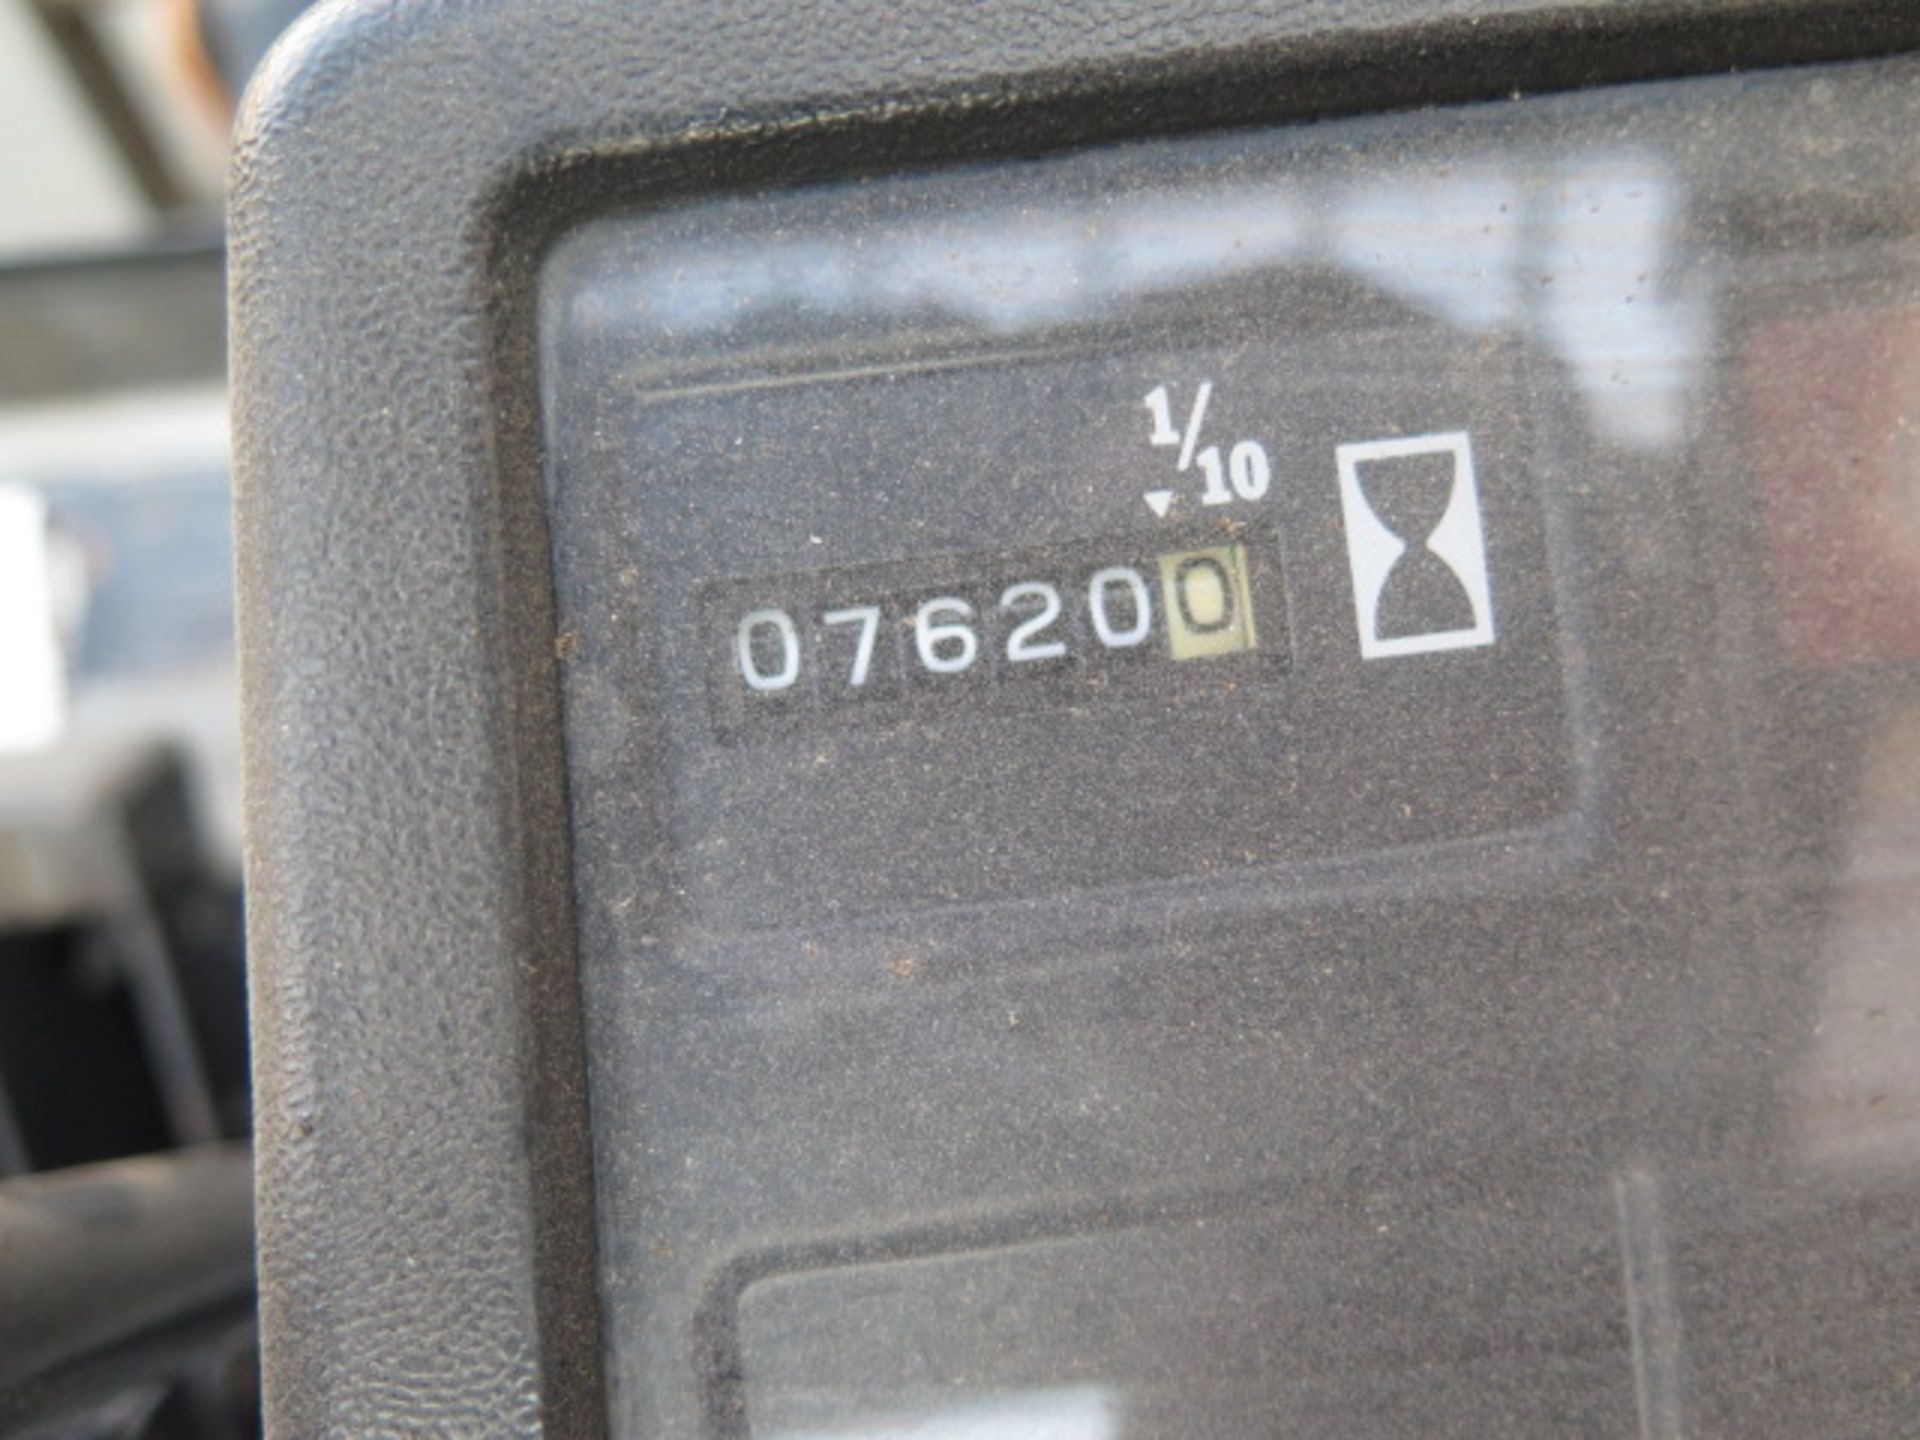 Toyota 02-5FGC30 5800 Lb Cap LPG Forklift s/n 5FGC30-11577 w/ 3-Stage Mast, Side Shift, SOLD AS IS - Image 10 of 11